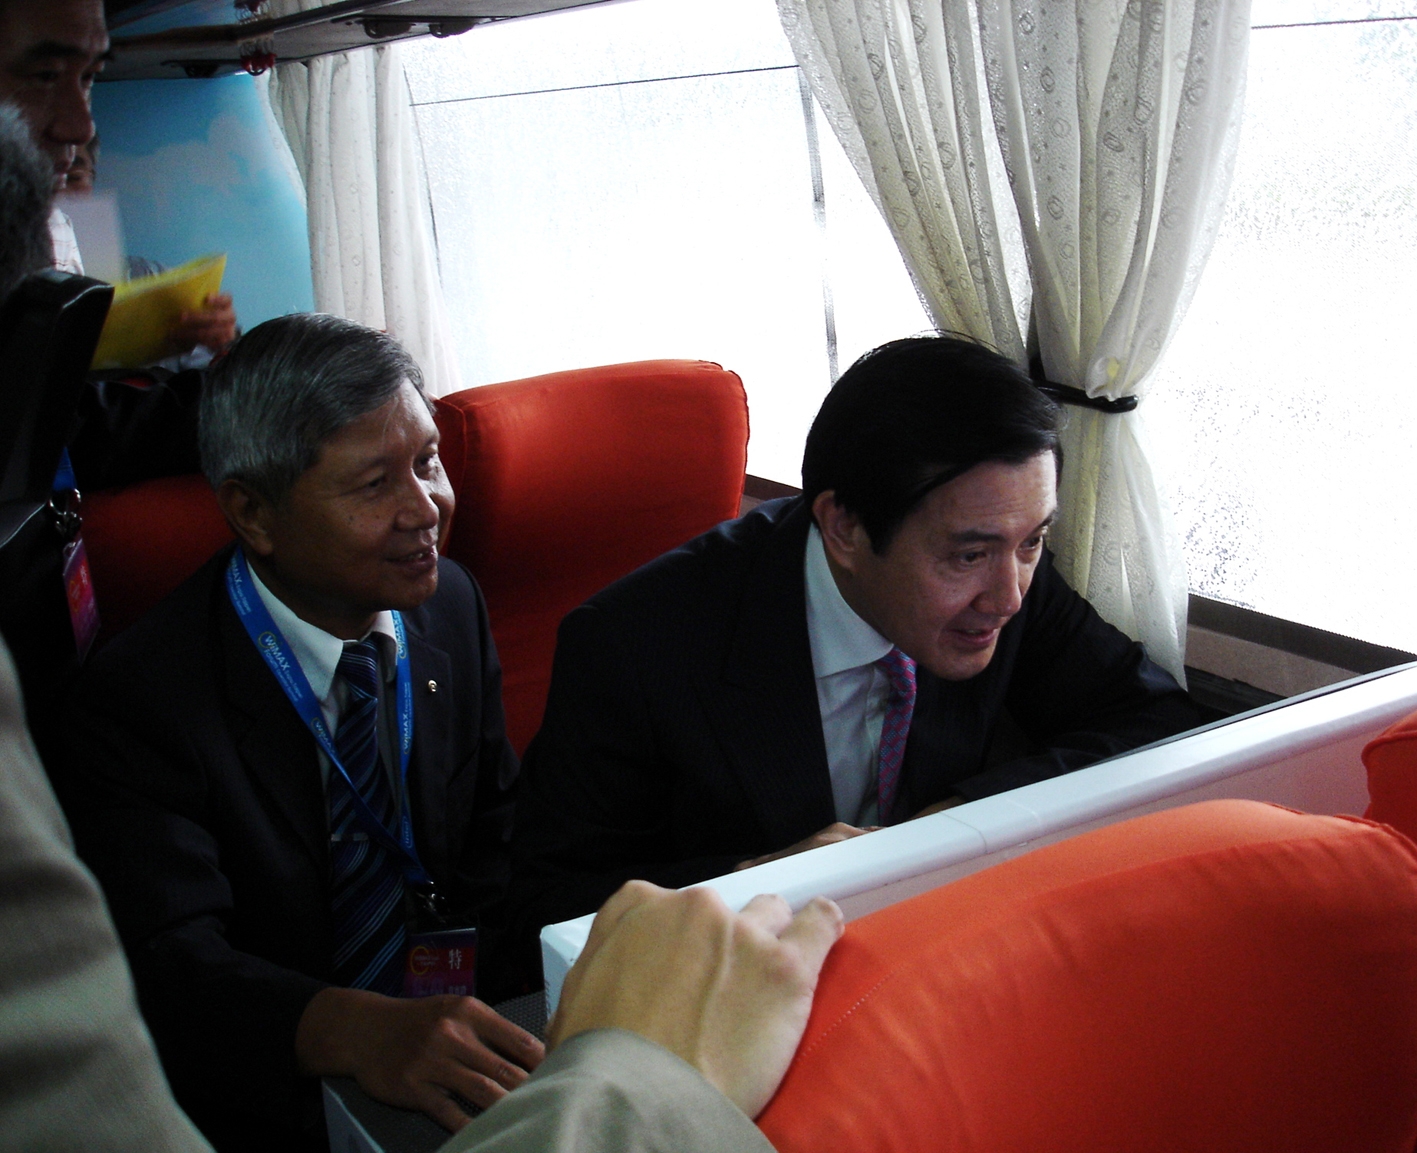 President Ma Ying-jeou watches a screen demonstrating WiMAX application on a bus.